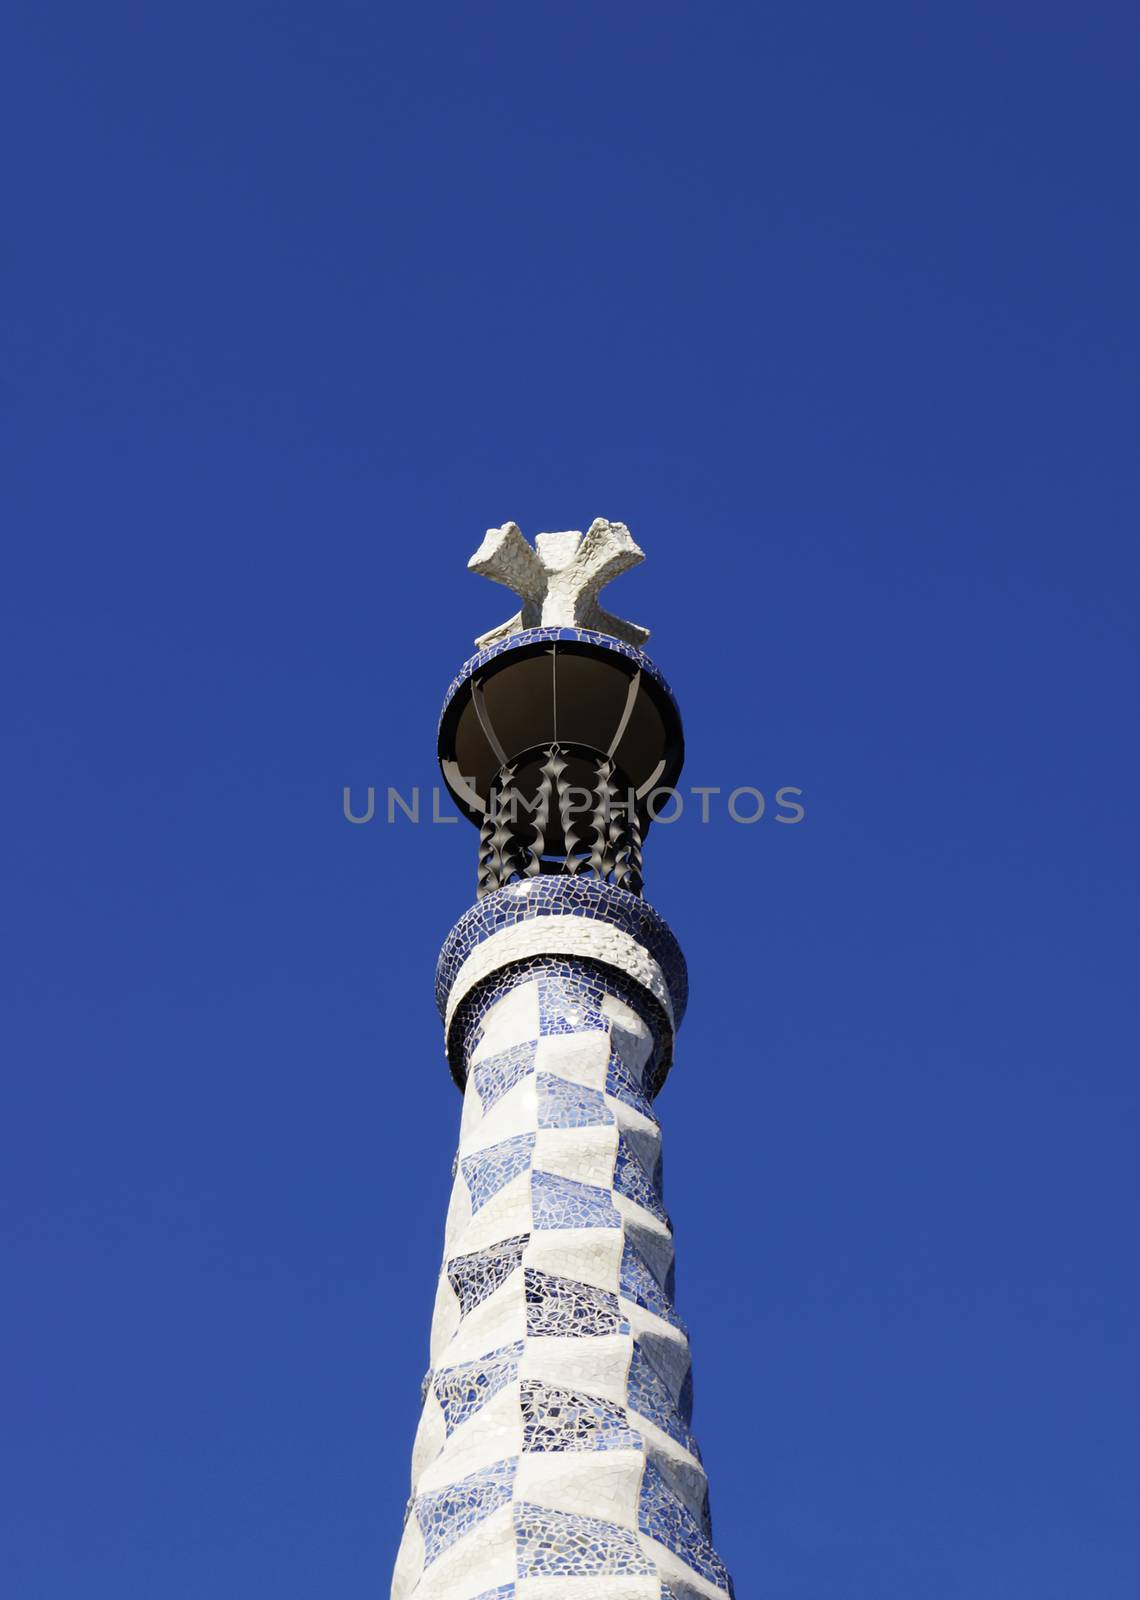 Tower in Park Guell, Barcelona, Spain